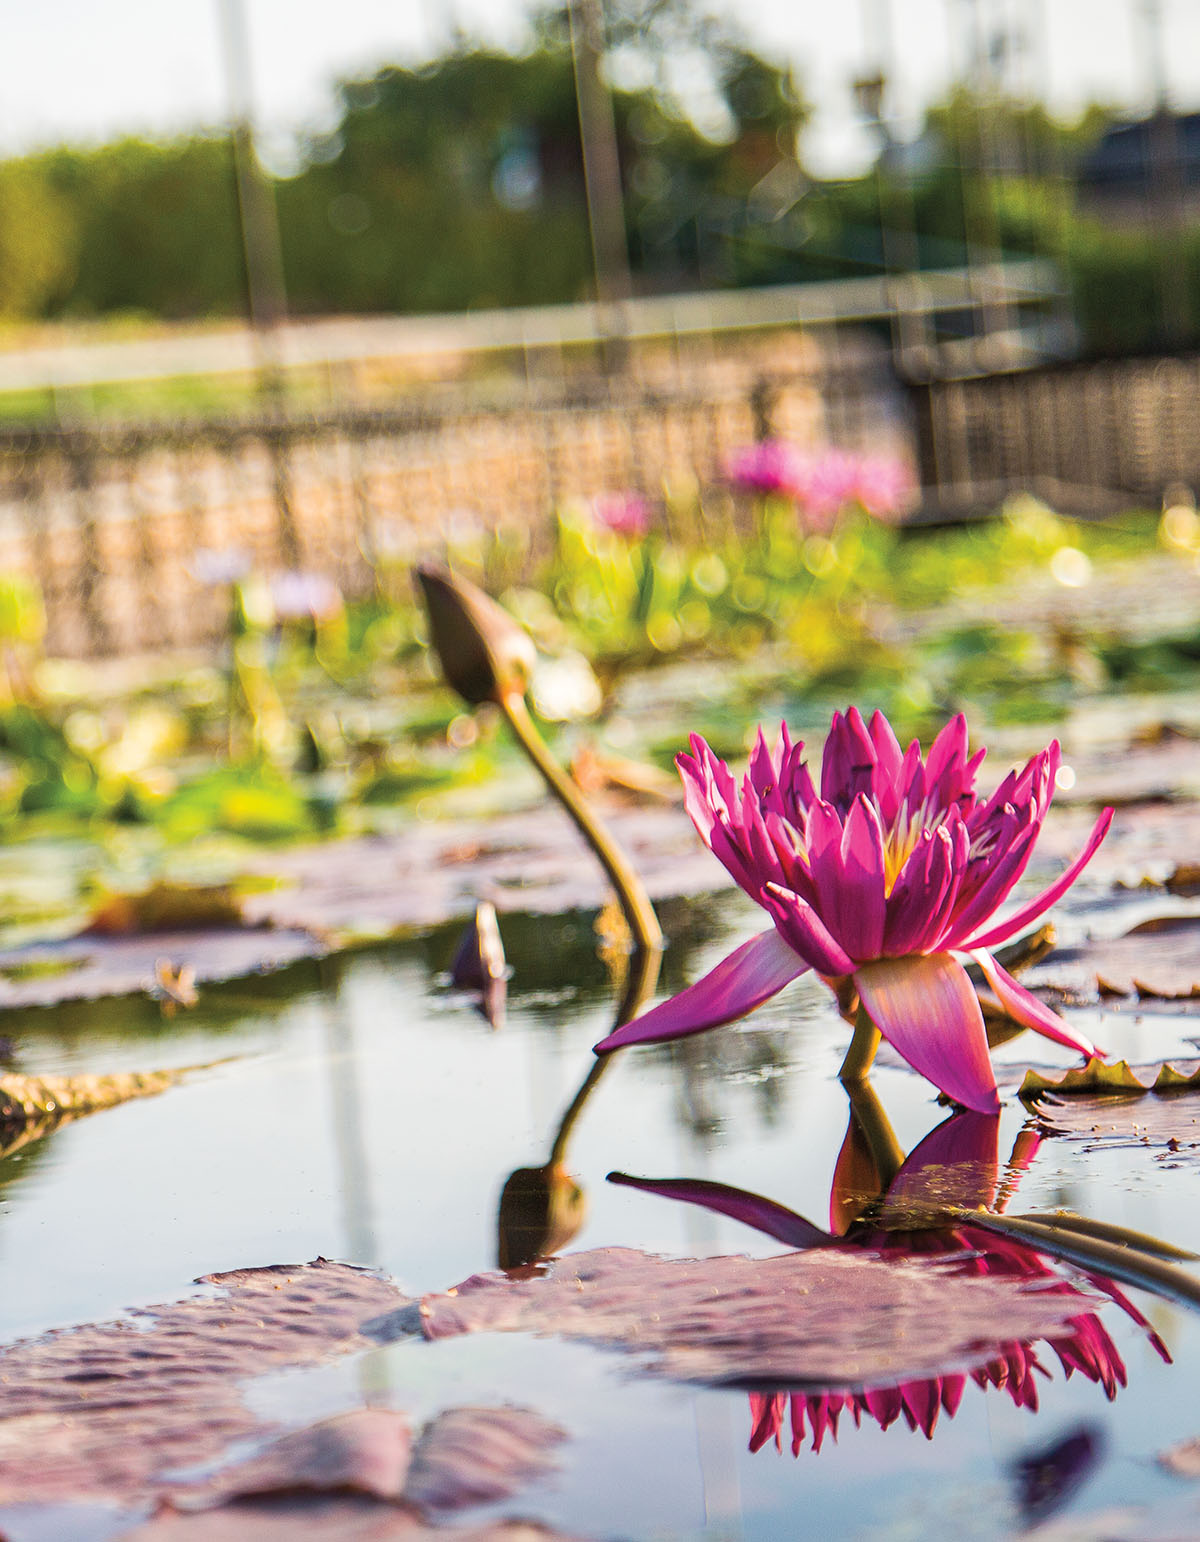 A pink flower rests on a water lilly in a serene setting